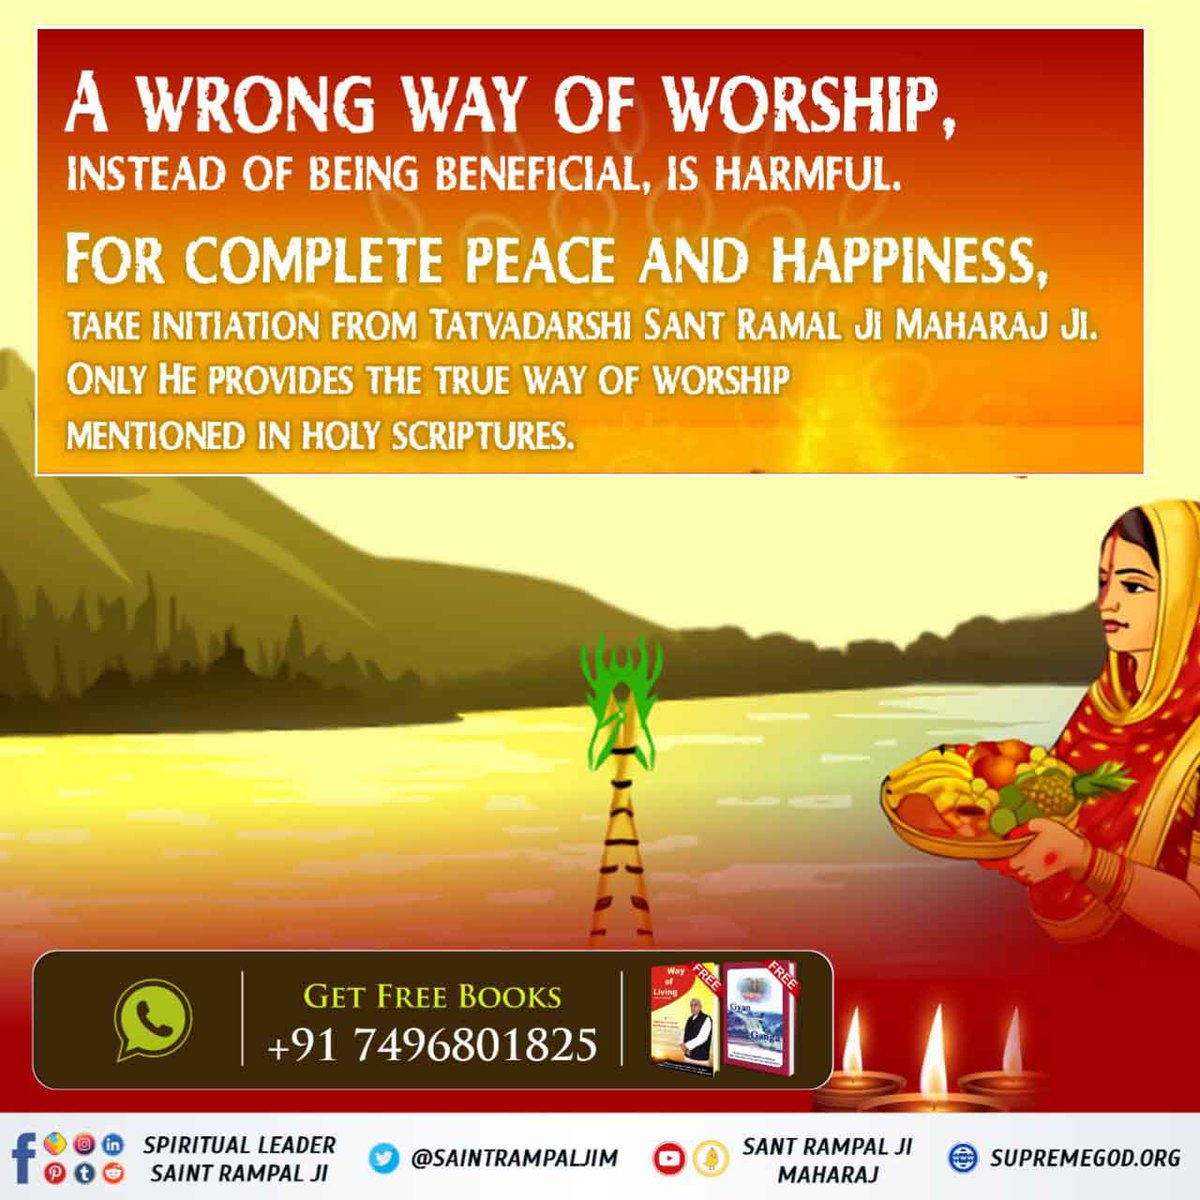 #GodMorningTh#Chhath puja is against Bhagavad Gita According to Bhagavad Gita chapter 16:23those who perform an arbitrary practice that is devoid of the injunctions of scriptures remain in the vicious cycle of birth-death and suffe
#छठ_पूजा_Reality 
#GodMorningThursdaursda